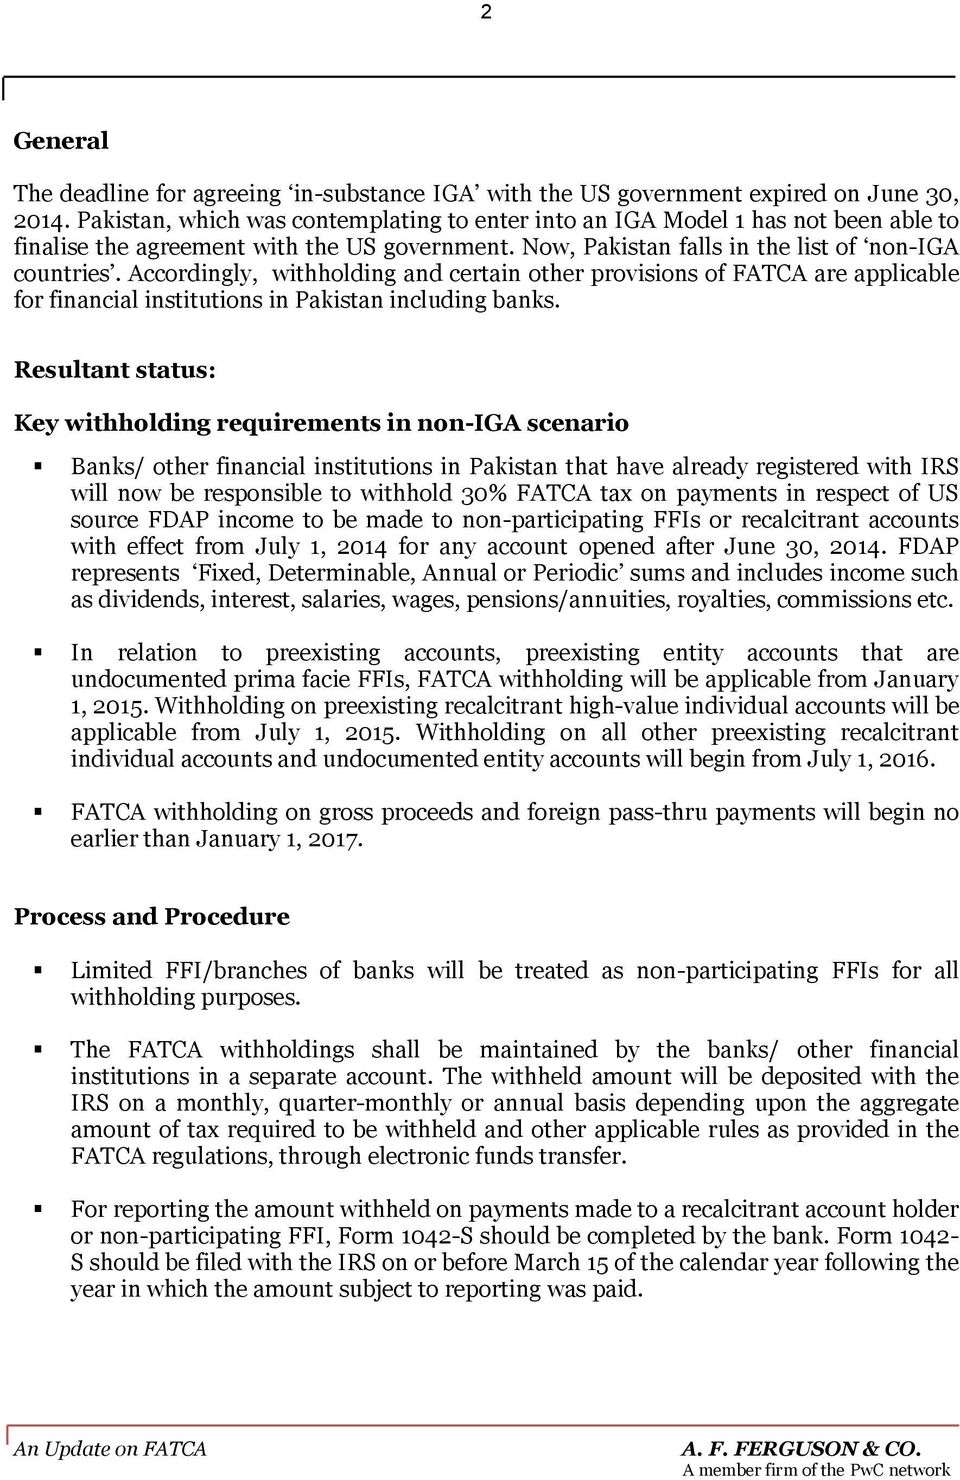 Accordingly, withholding and certain other provisions of FATCA are applicable for financial institutions in Pakistan including banks.